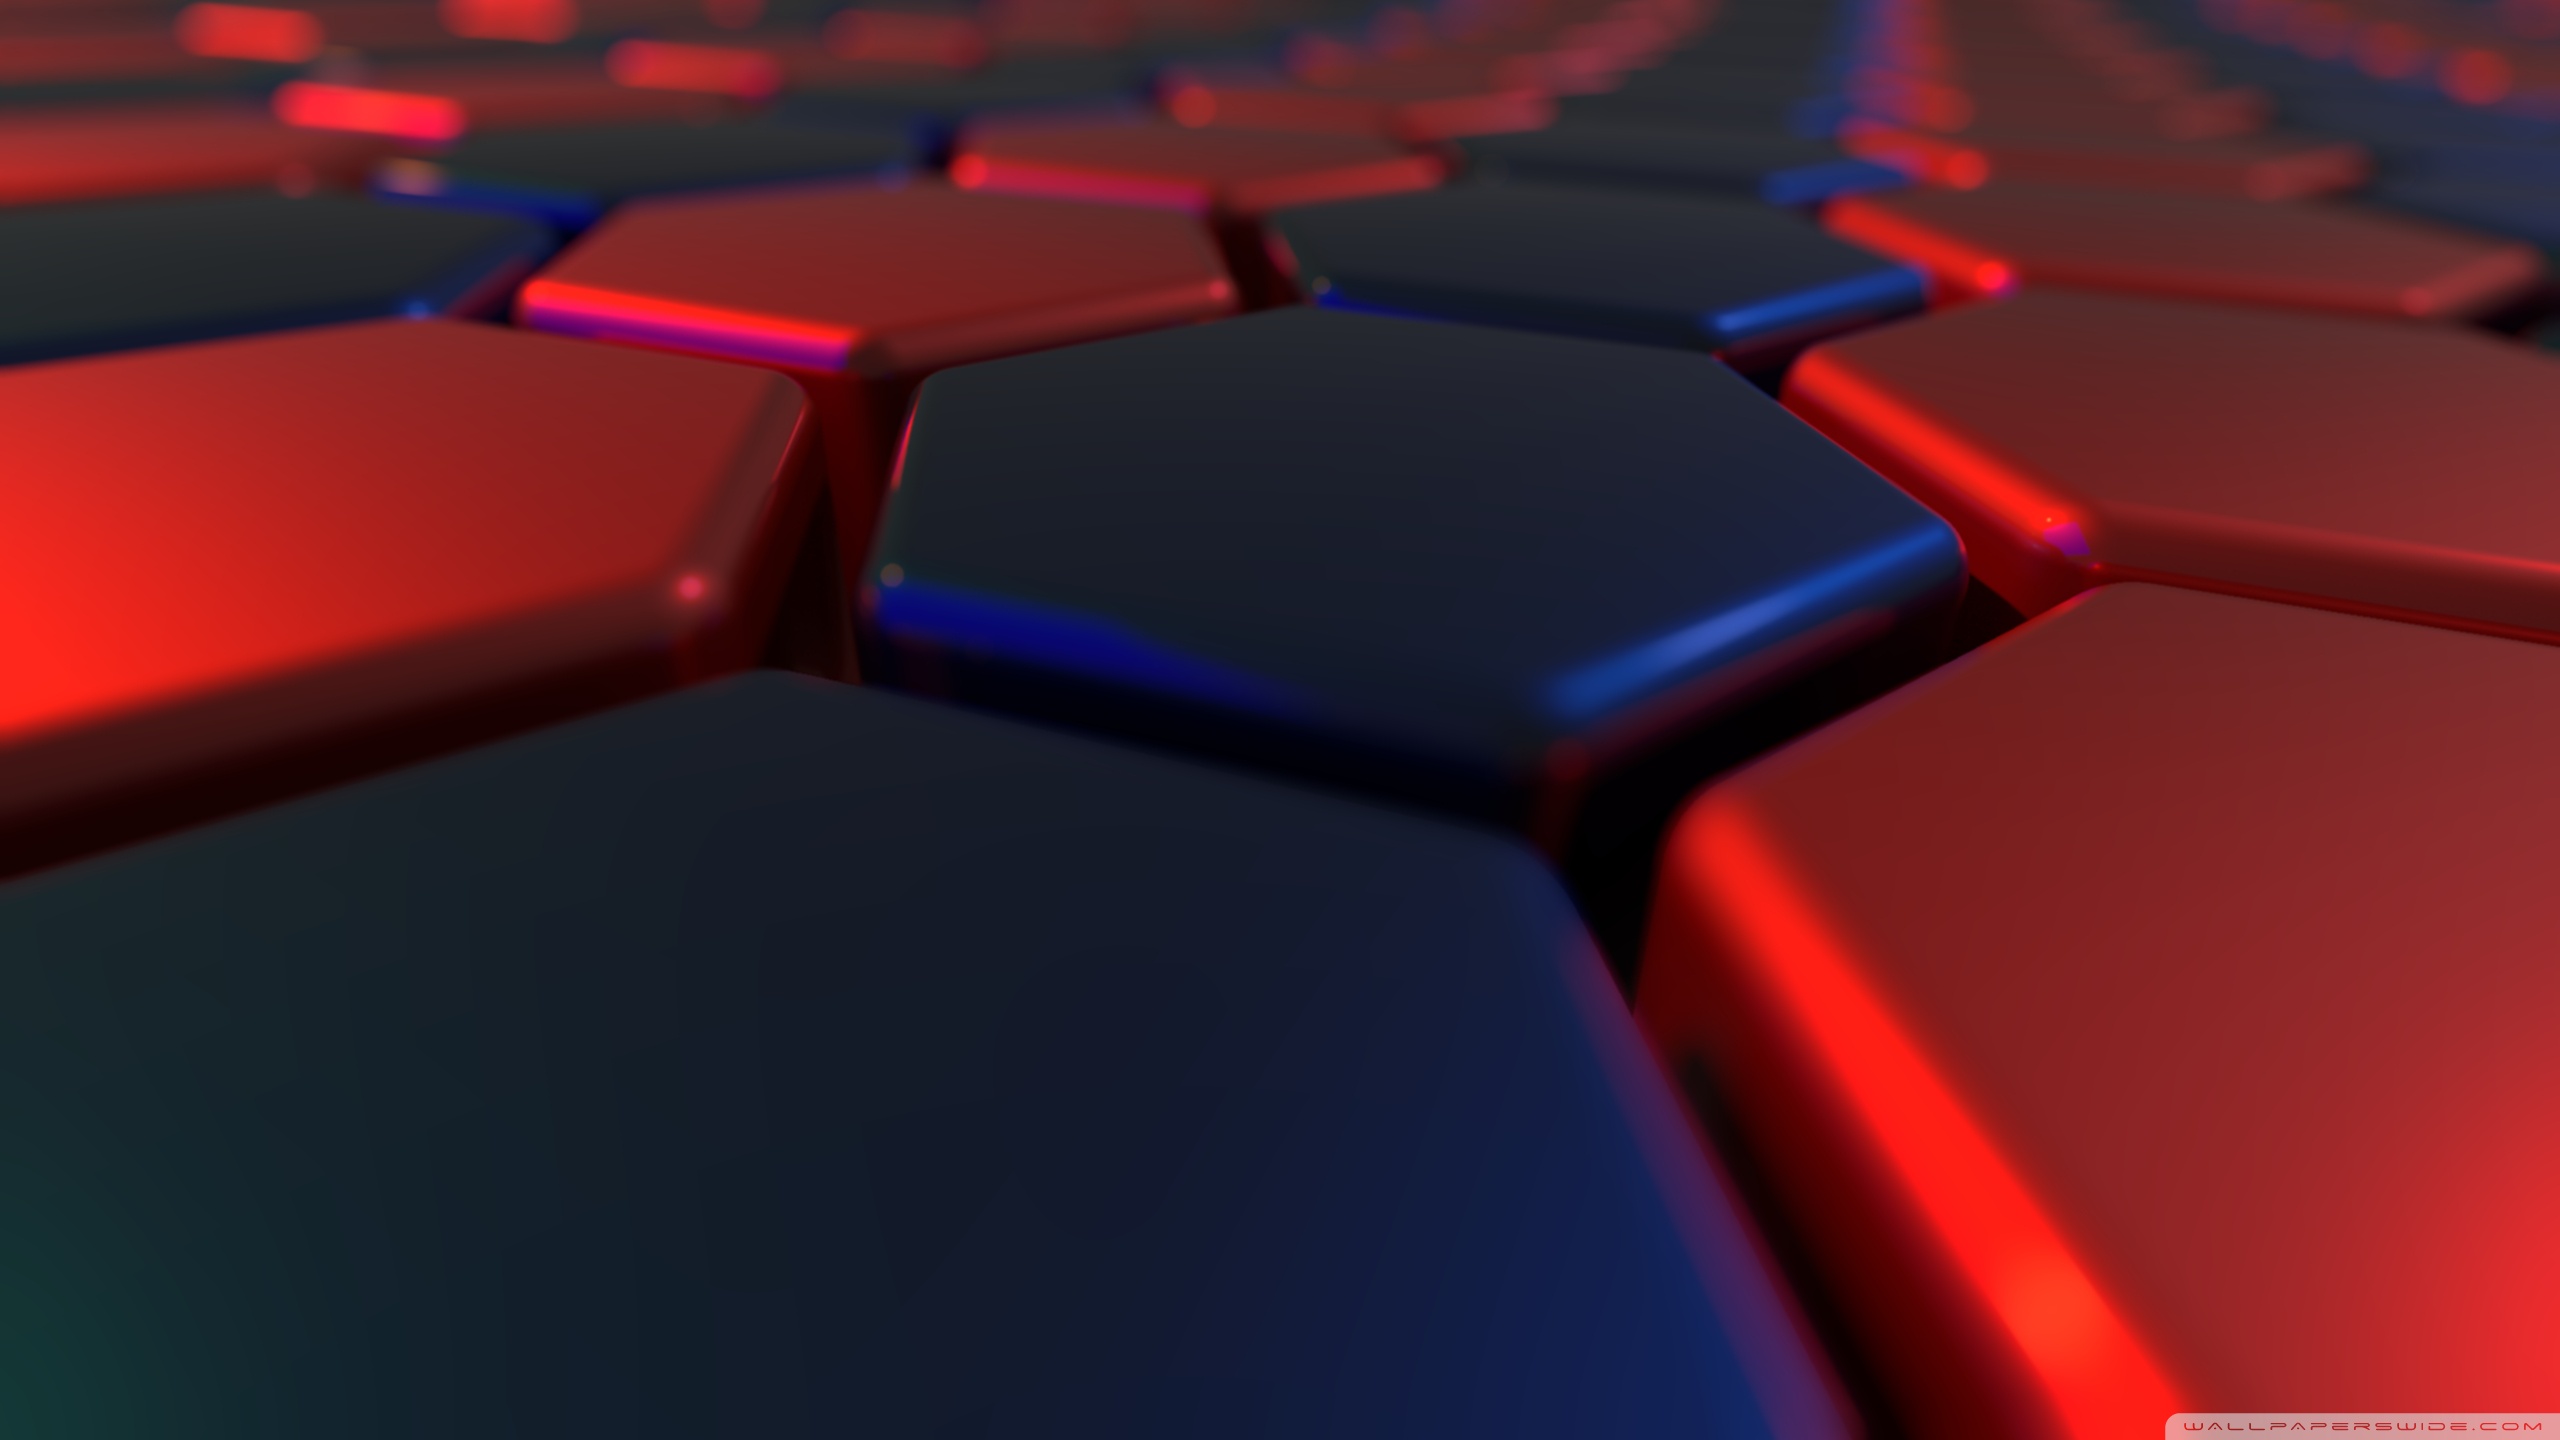 Red And Blue Abstract Wallpapers